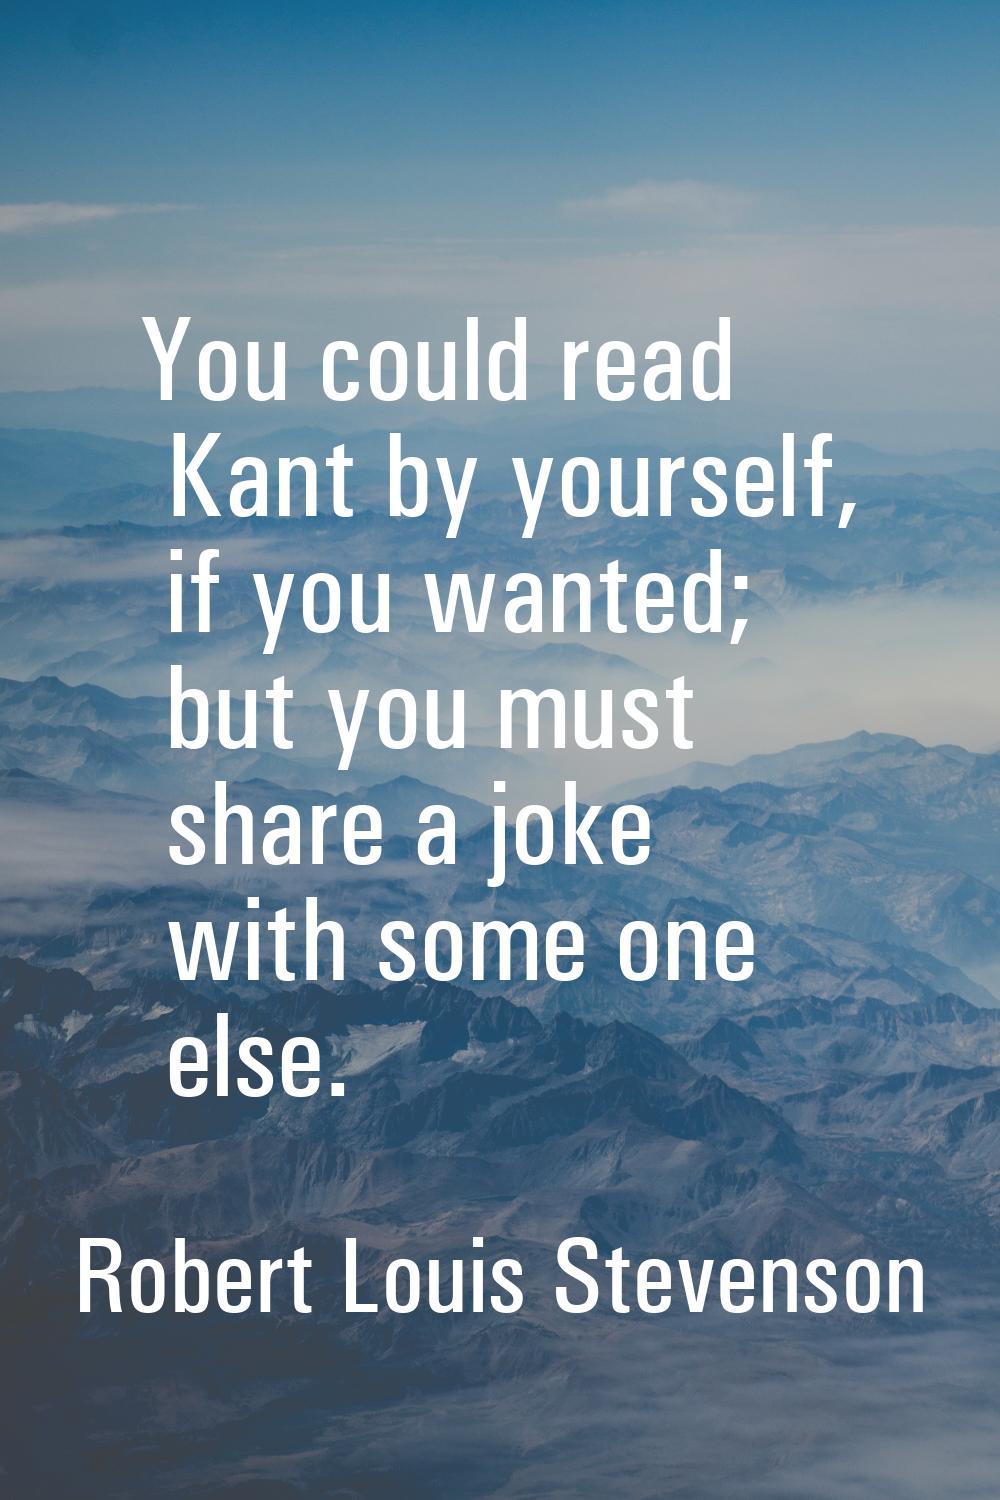 You could read Kant by yourself, if you wanted; but you must share a joke with some one else.